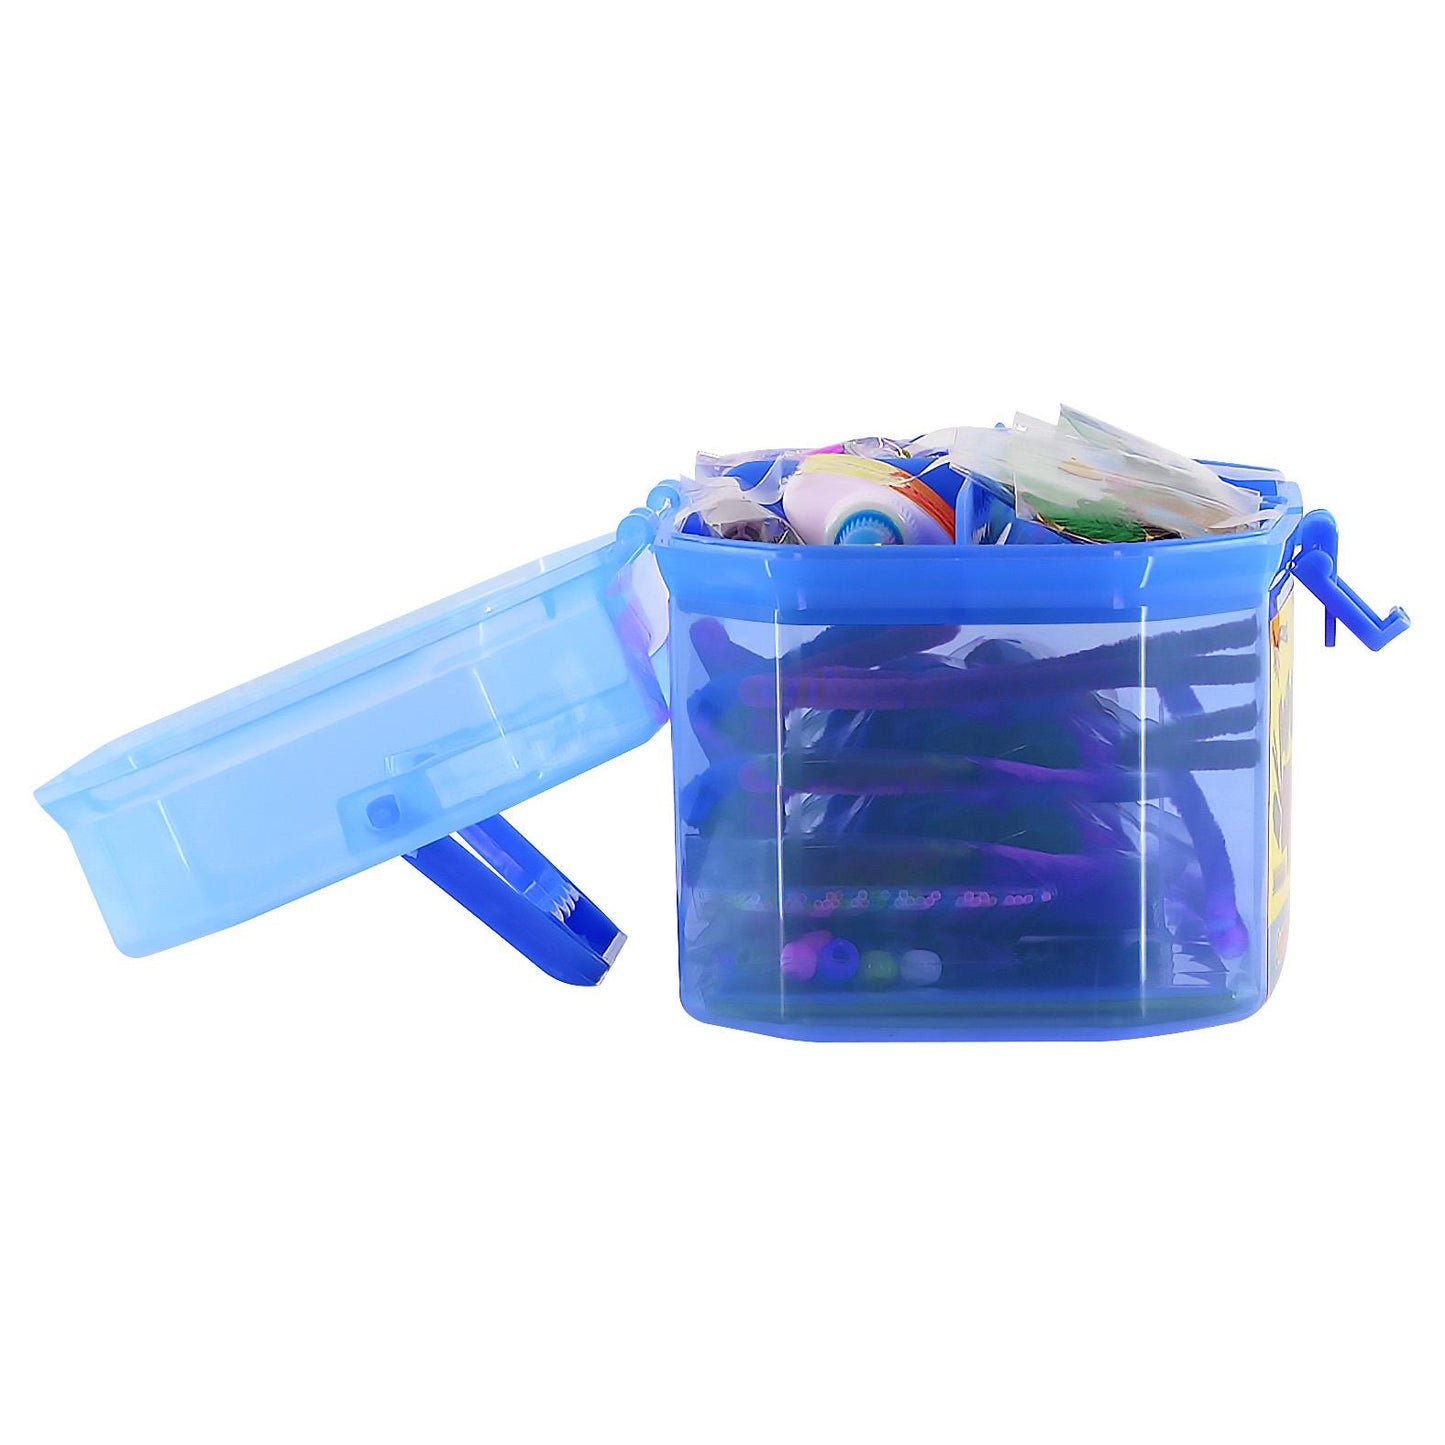 Blue Kids Super Craft Carry Case by The Magic Toy Shop - UKBuyZone